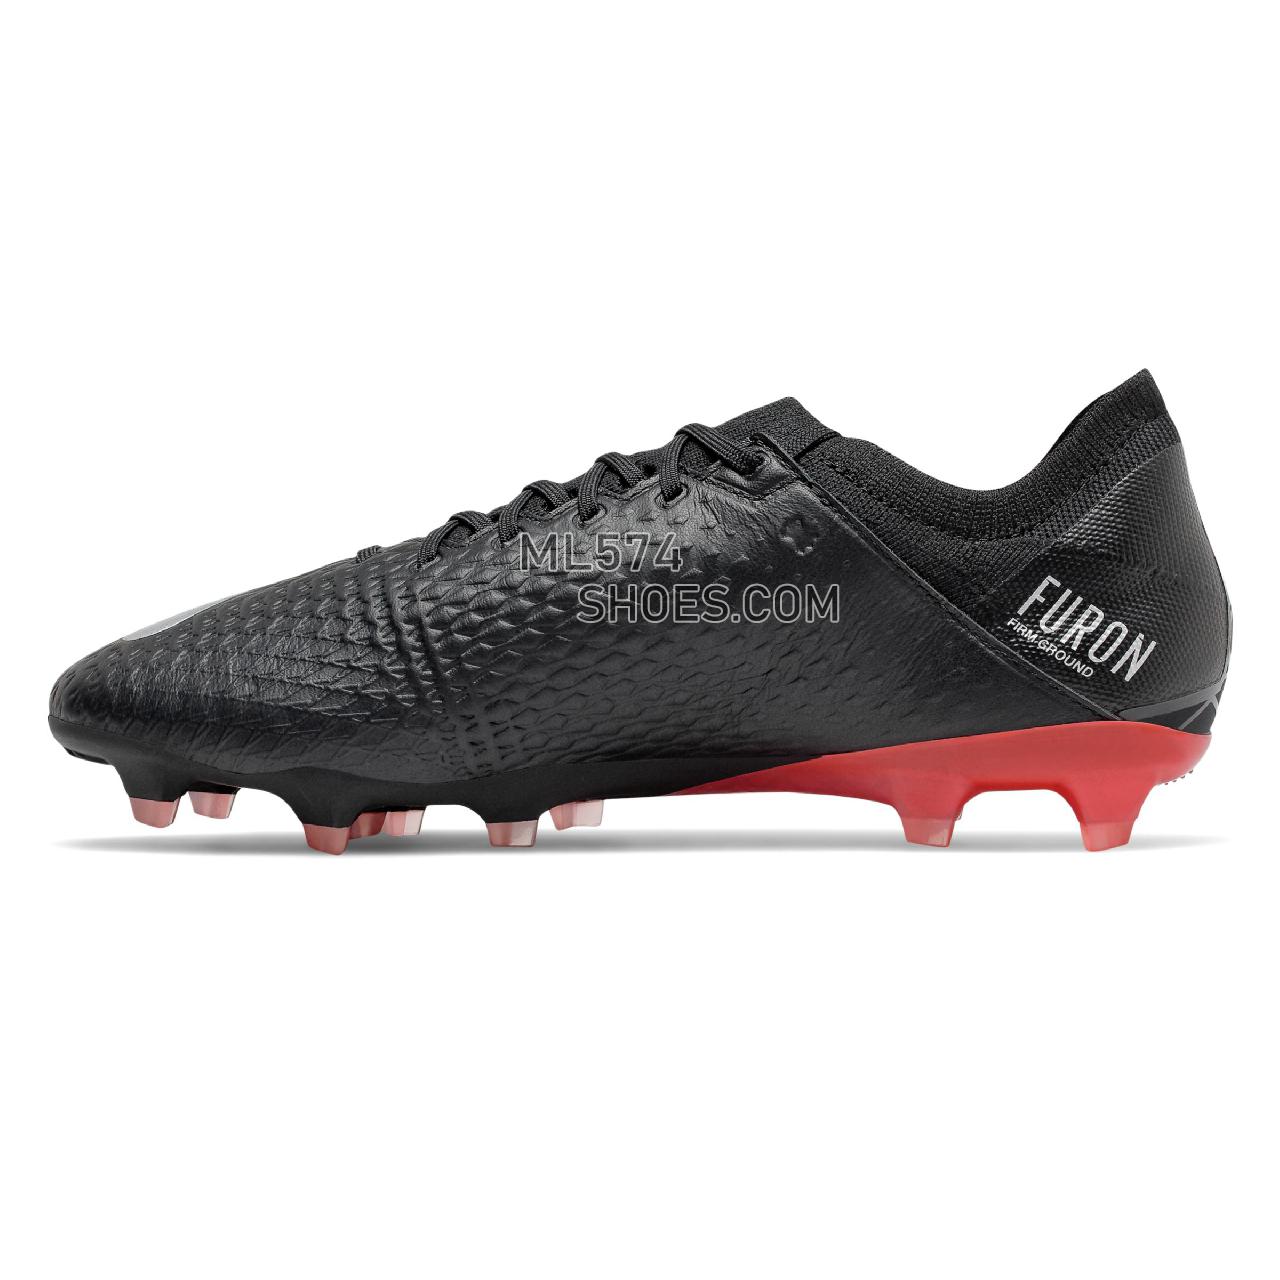 New Balance FURON V6 PRO LEATHER FG - Men's Soccer - Black with neo flame and neo crimson - MSFKFBF6